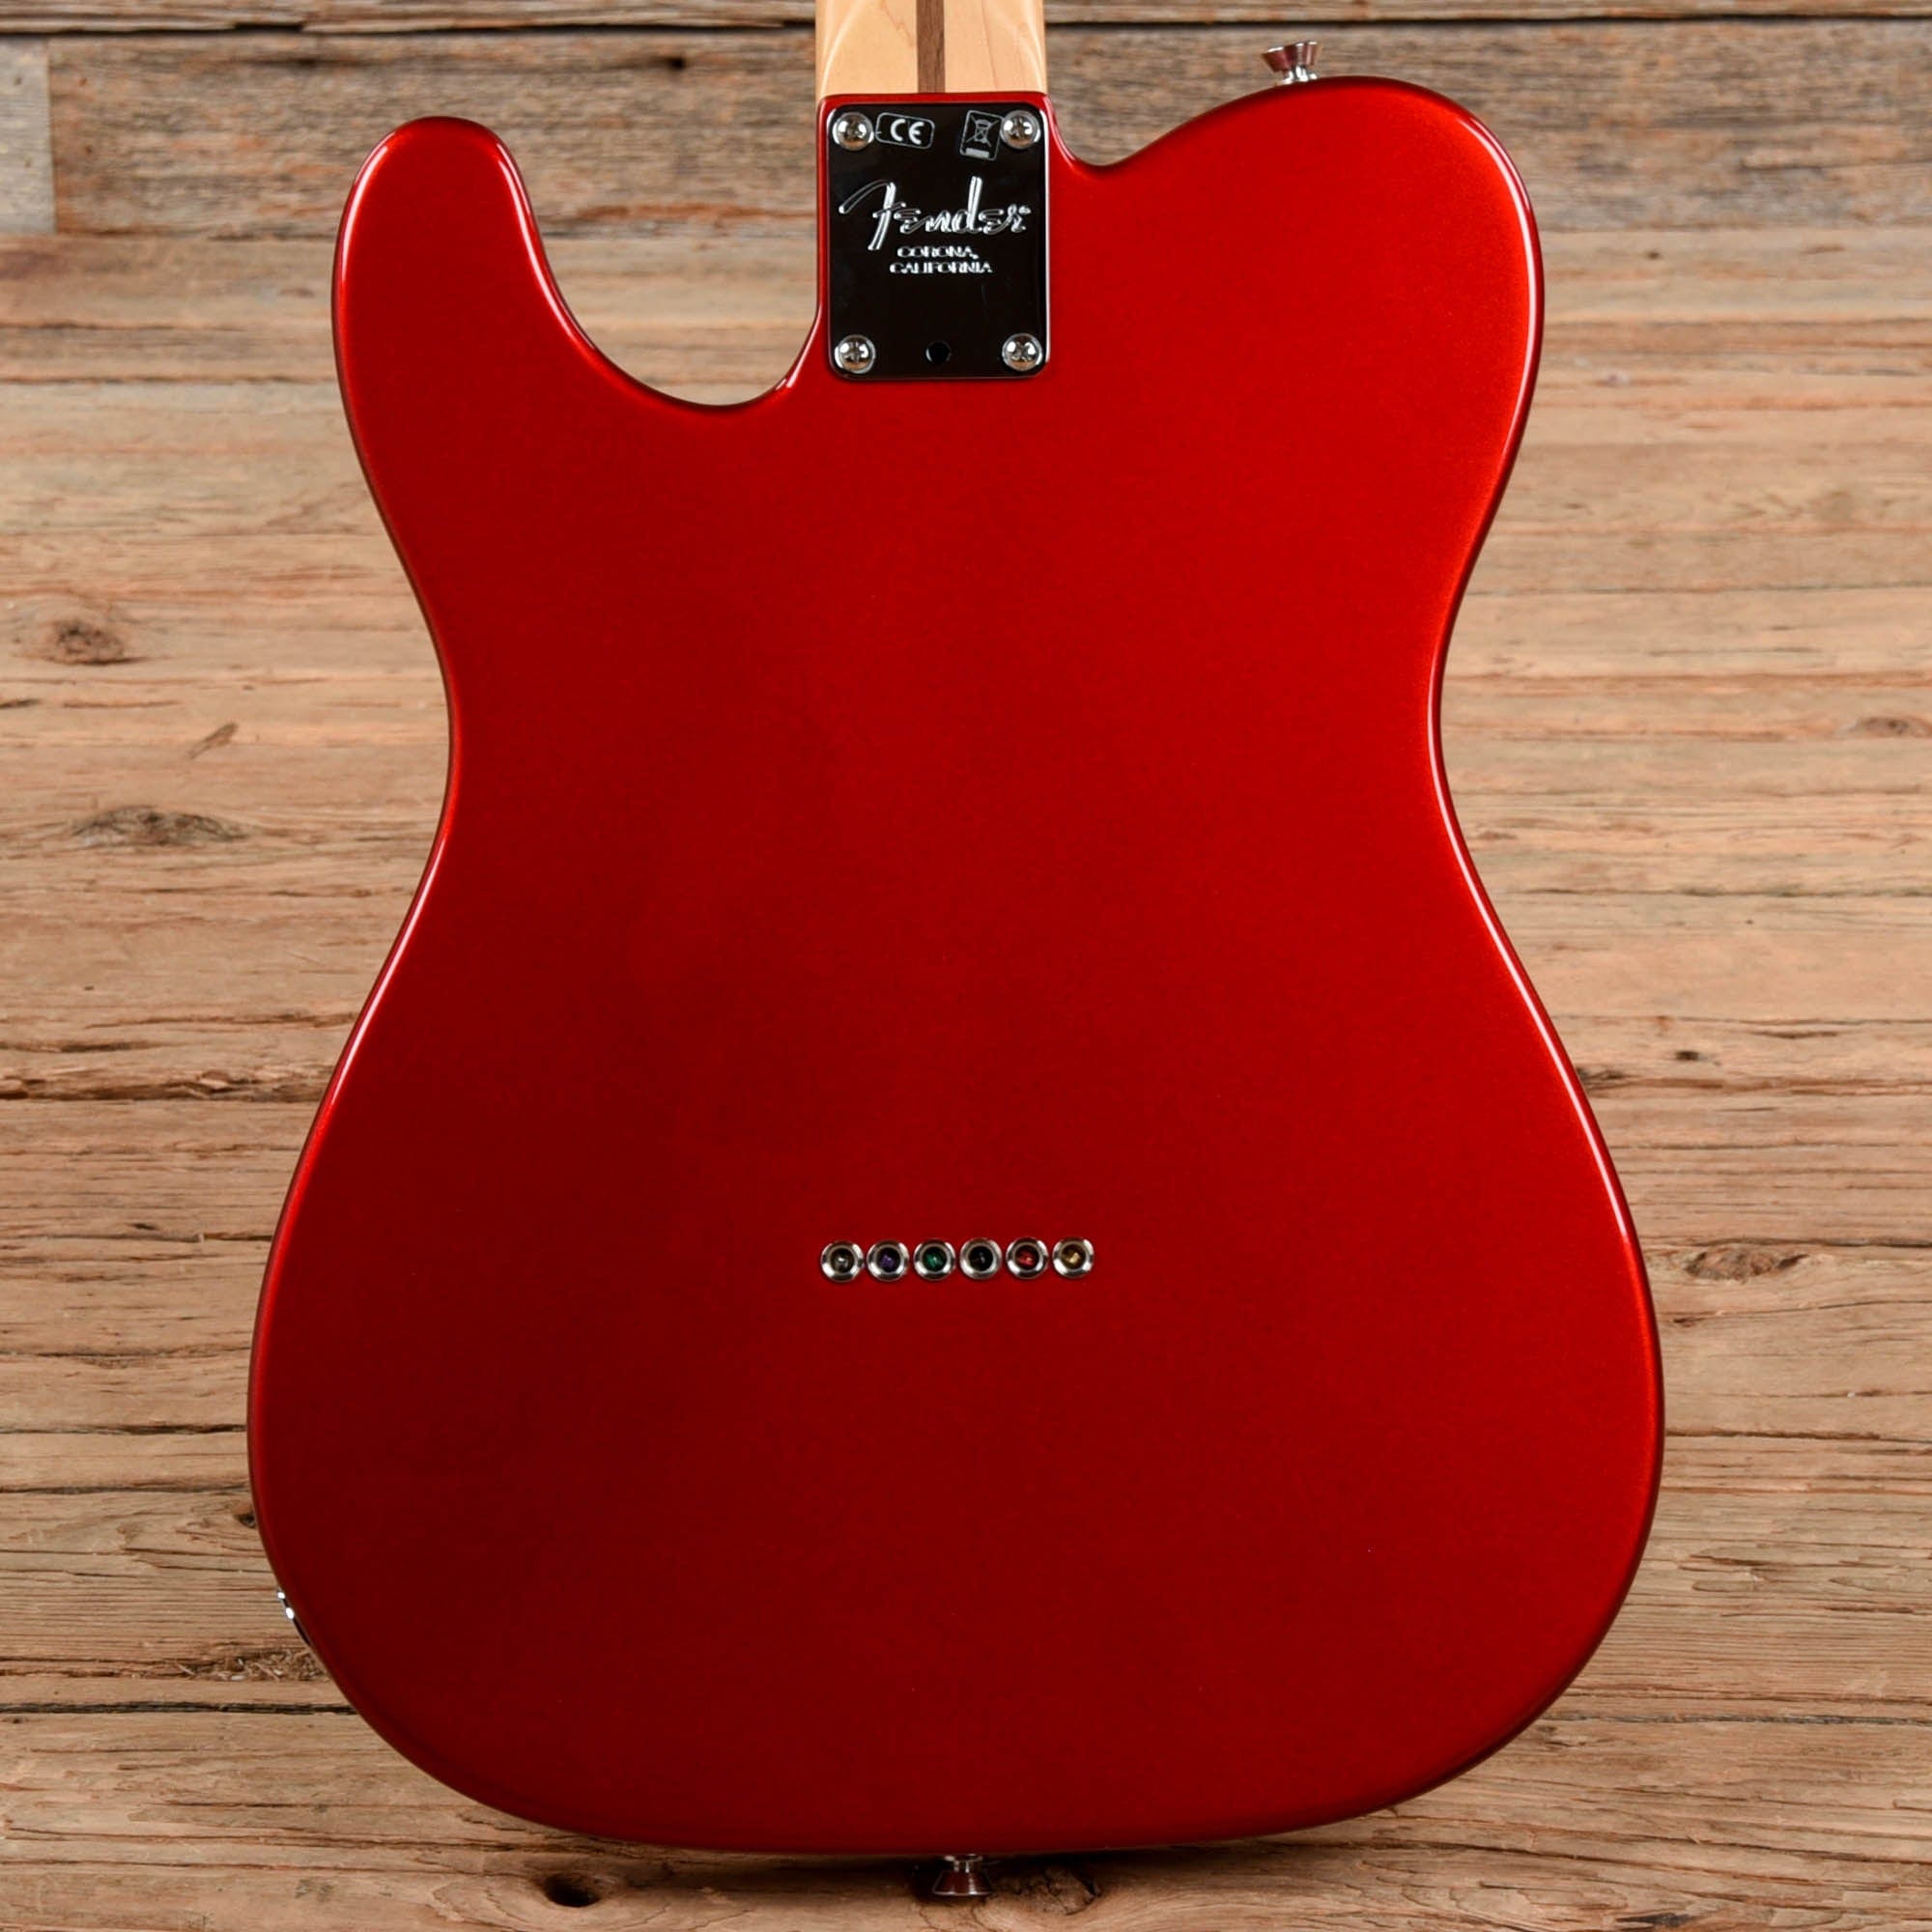 Fender American Professional Series Telecaster Deluxe Shawbucker Candy Apple Red 2017 Electric Guitars / Solid Body